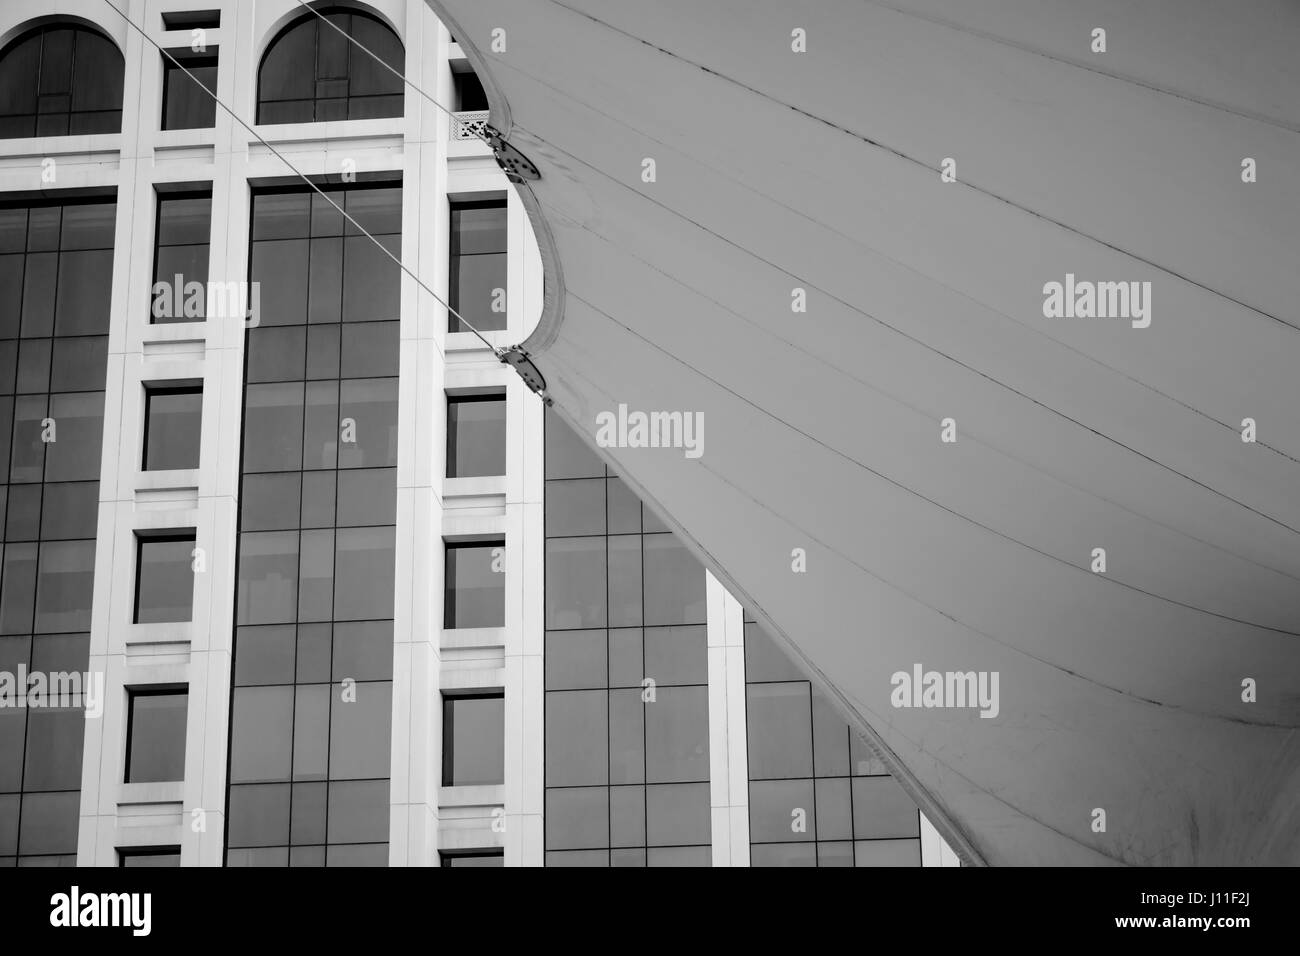 Low Angle View of Modern Building Facade and Street Shadow Maker Stock Photo